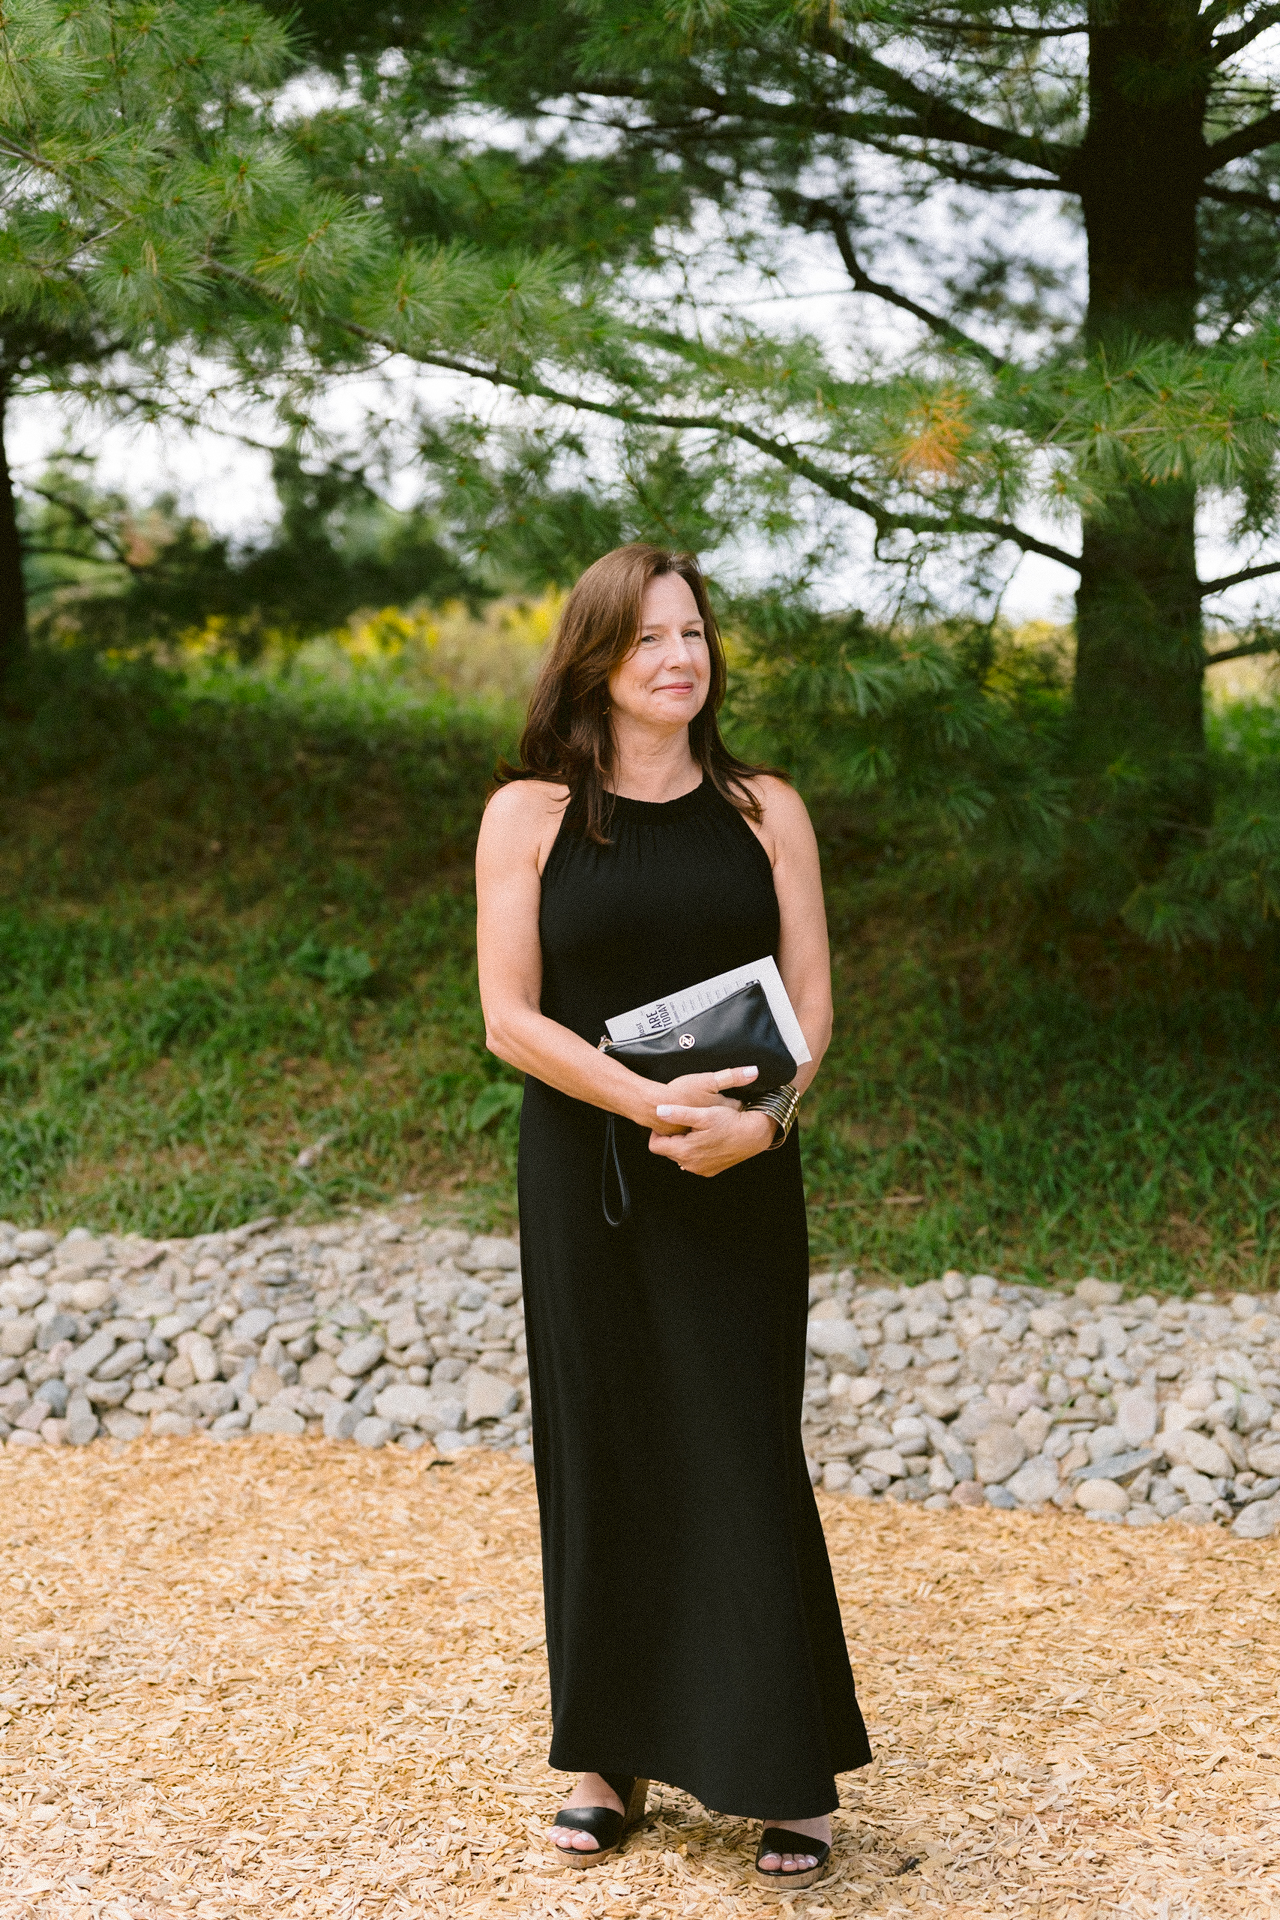 Stylish guest in black attire with purse, awaiting wedding ceremony.